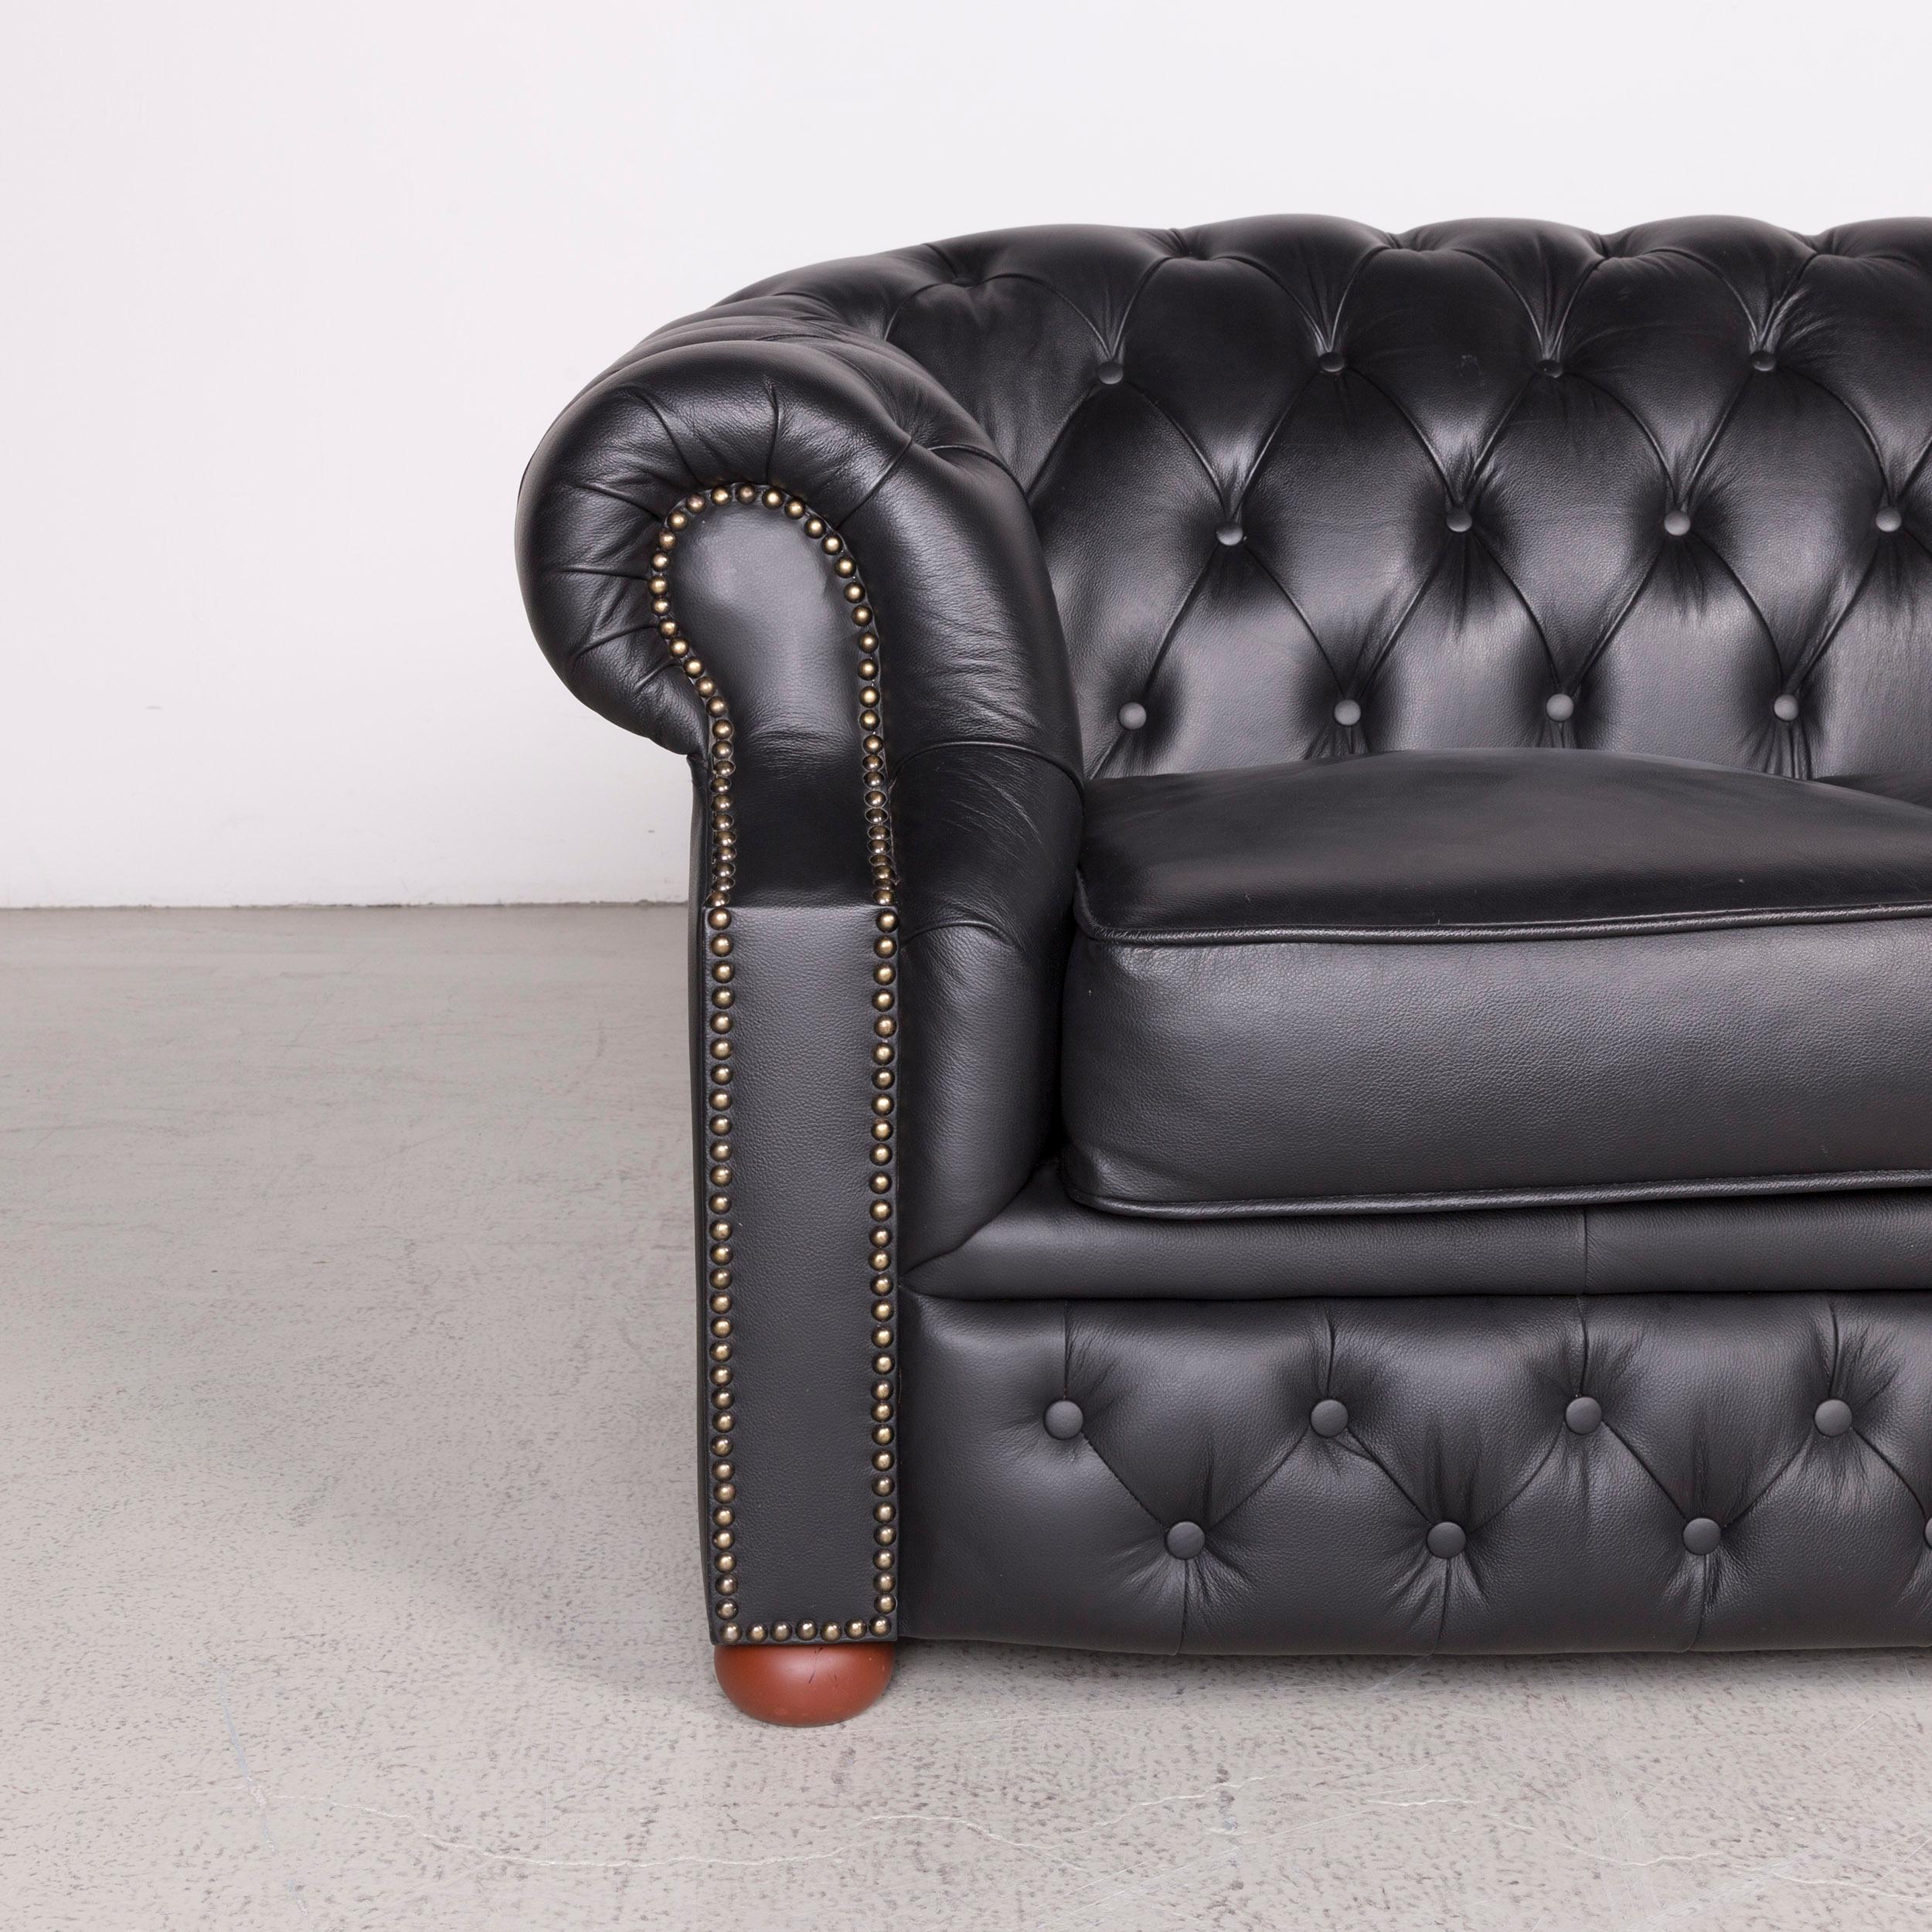 Chesterfield Designer Leather Sofa Black Three-Seater Real Leather Couch Retro In Excellent Condition For Sale In Cologne, DE